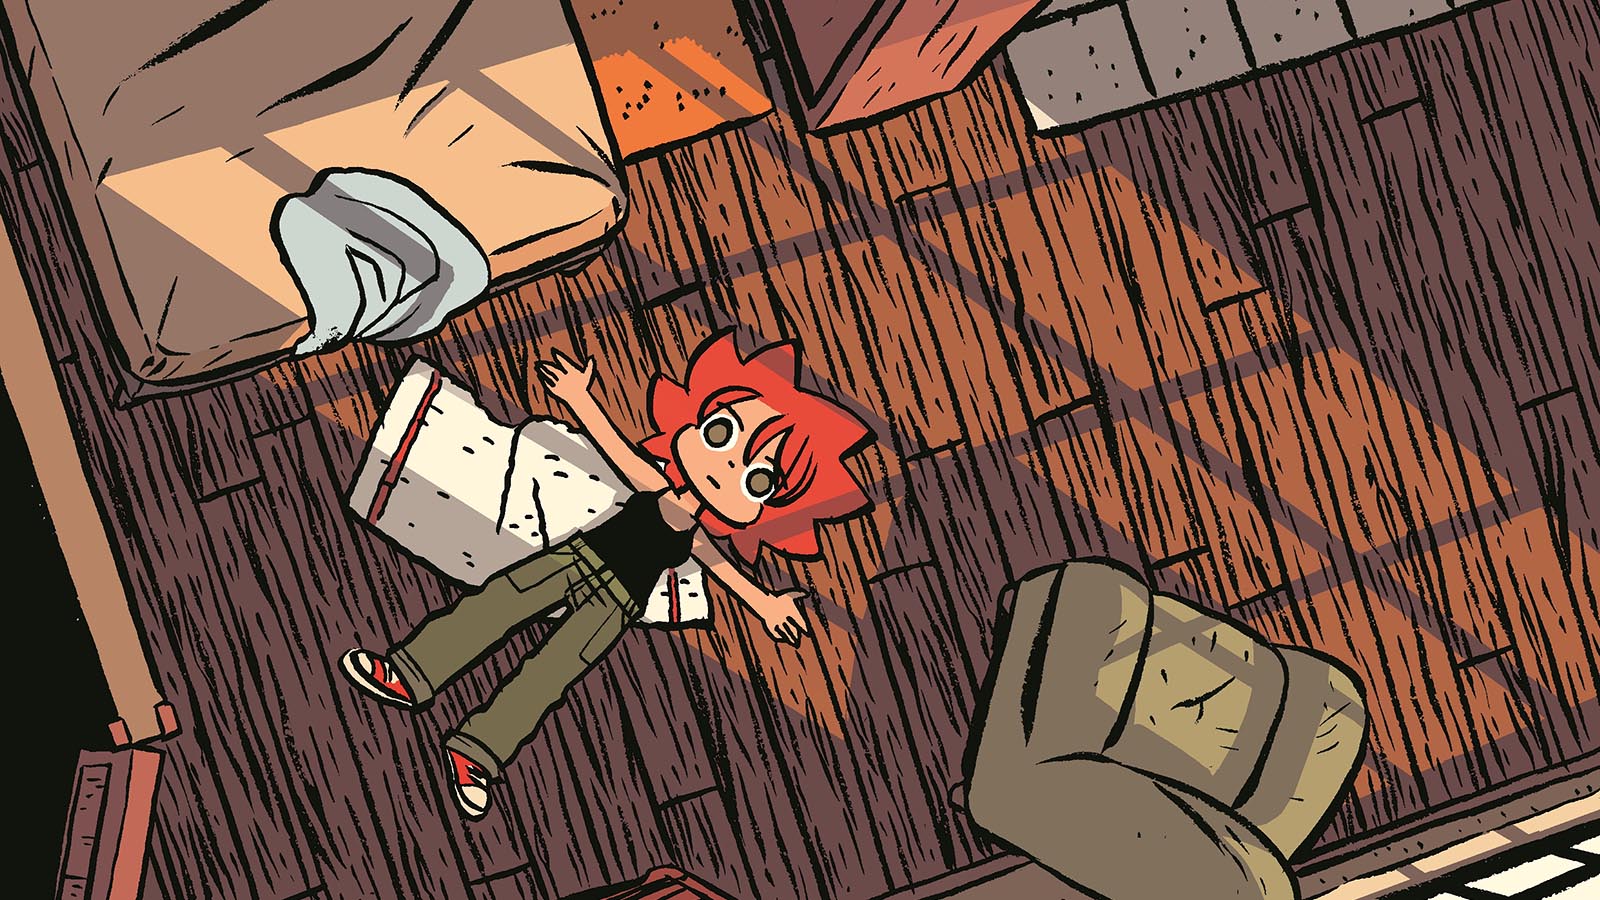 panel from "Seconds" by Bryan Lee O'Malley.